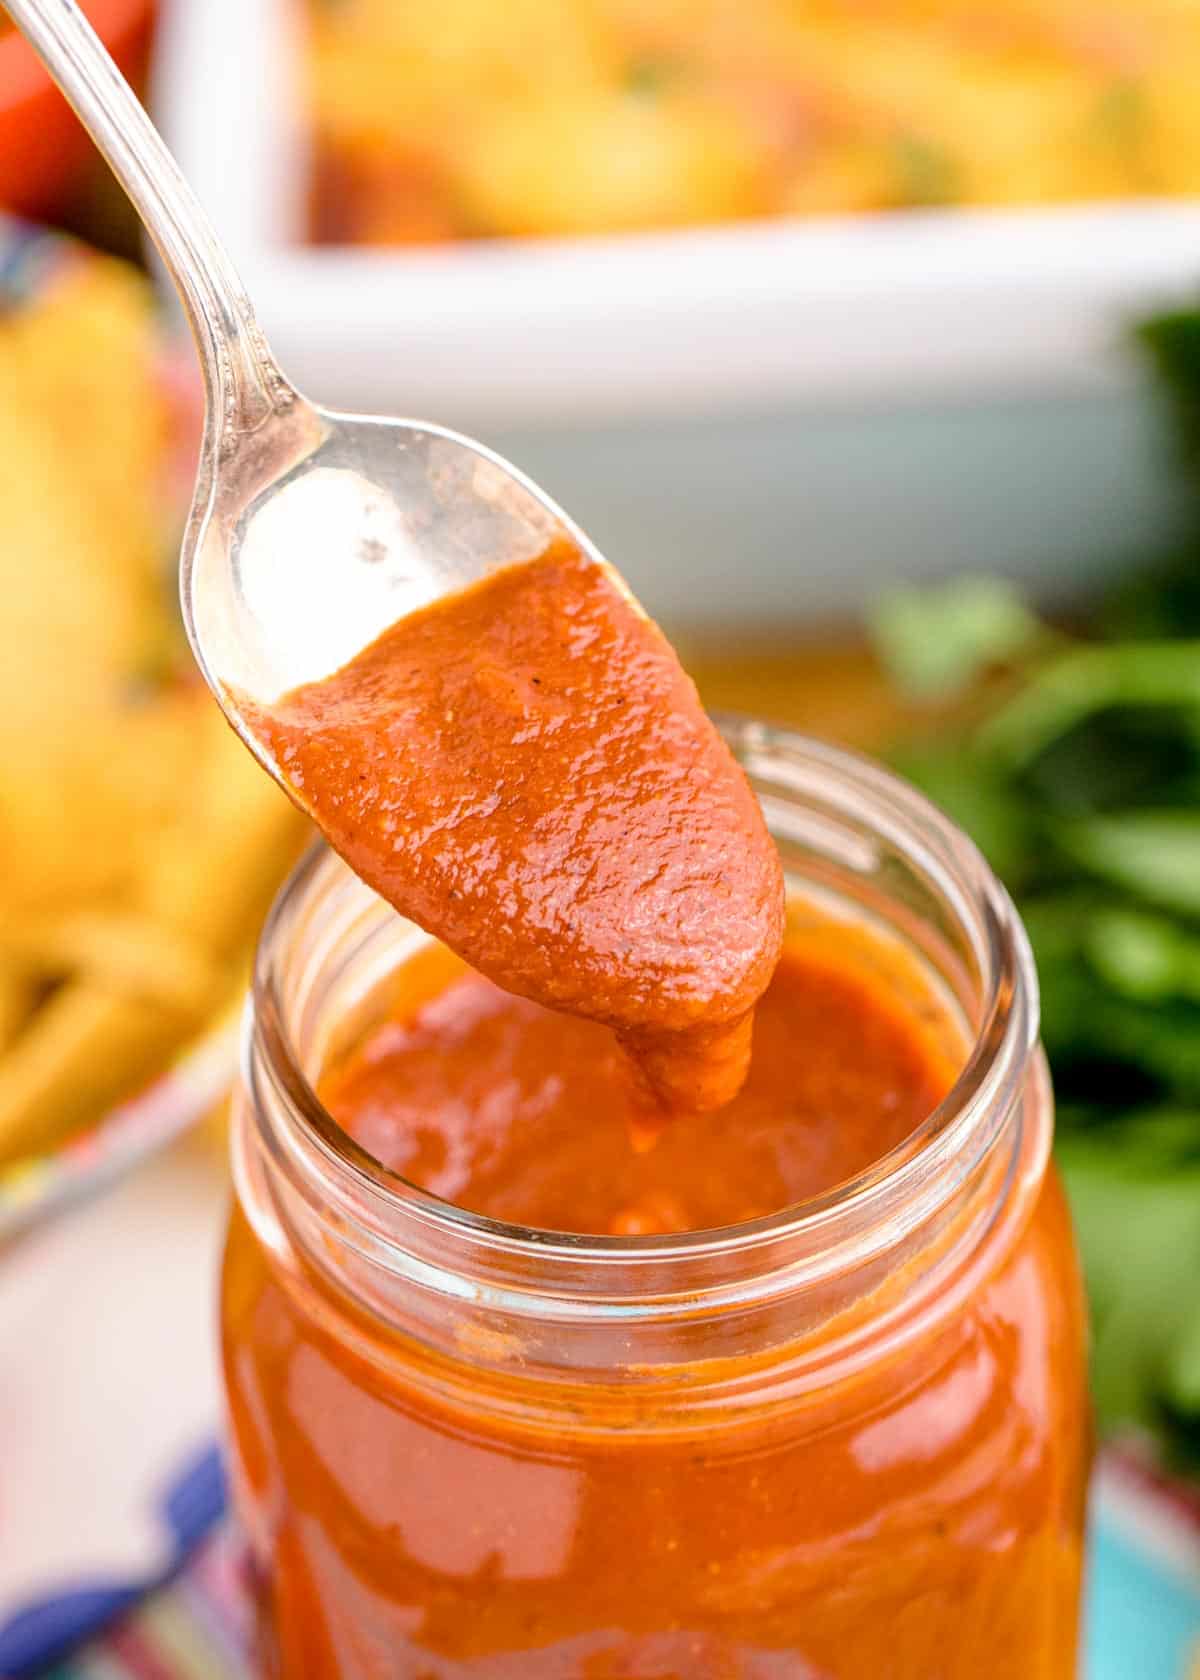 A spoon scooping enchilada sauce out of a jar.